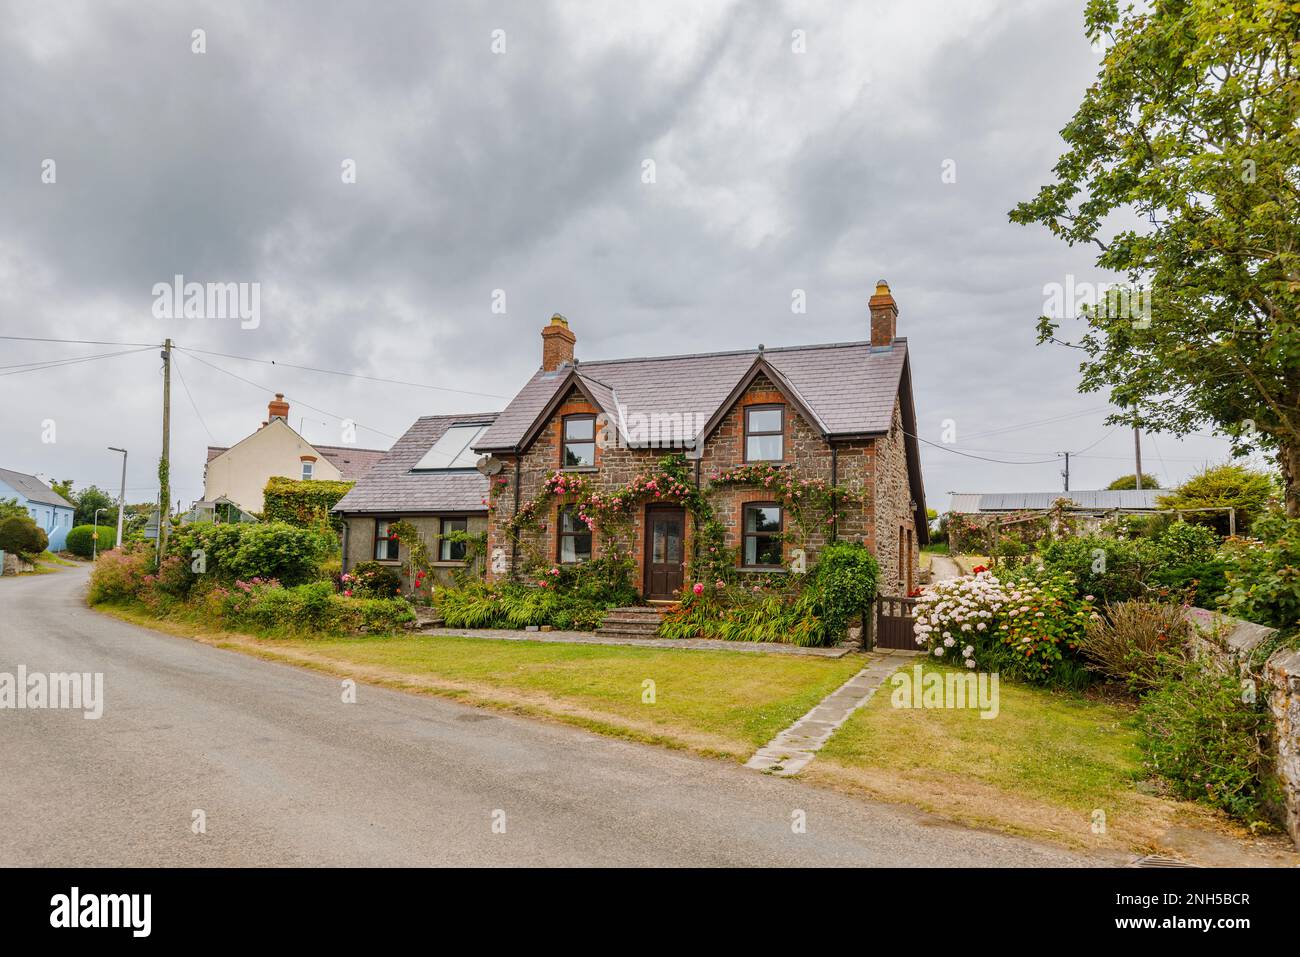 Large local style detached house with pink roses round the front door in Marloes, a small village on the Marloes Peninsula, Pembrokeshire, west Wales Stock Photo